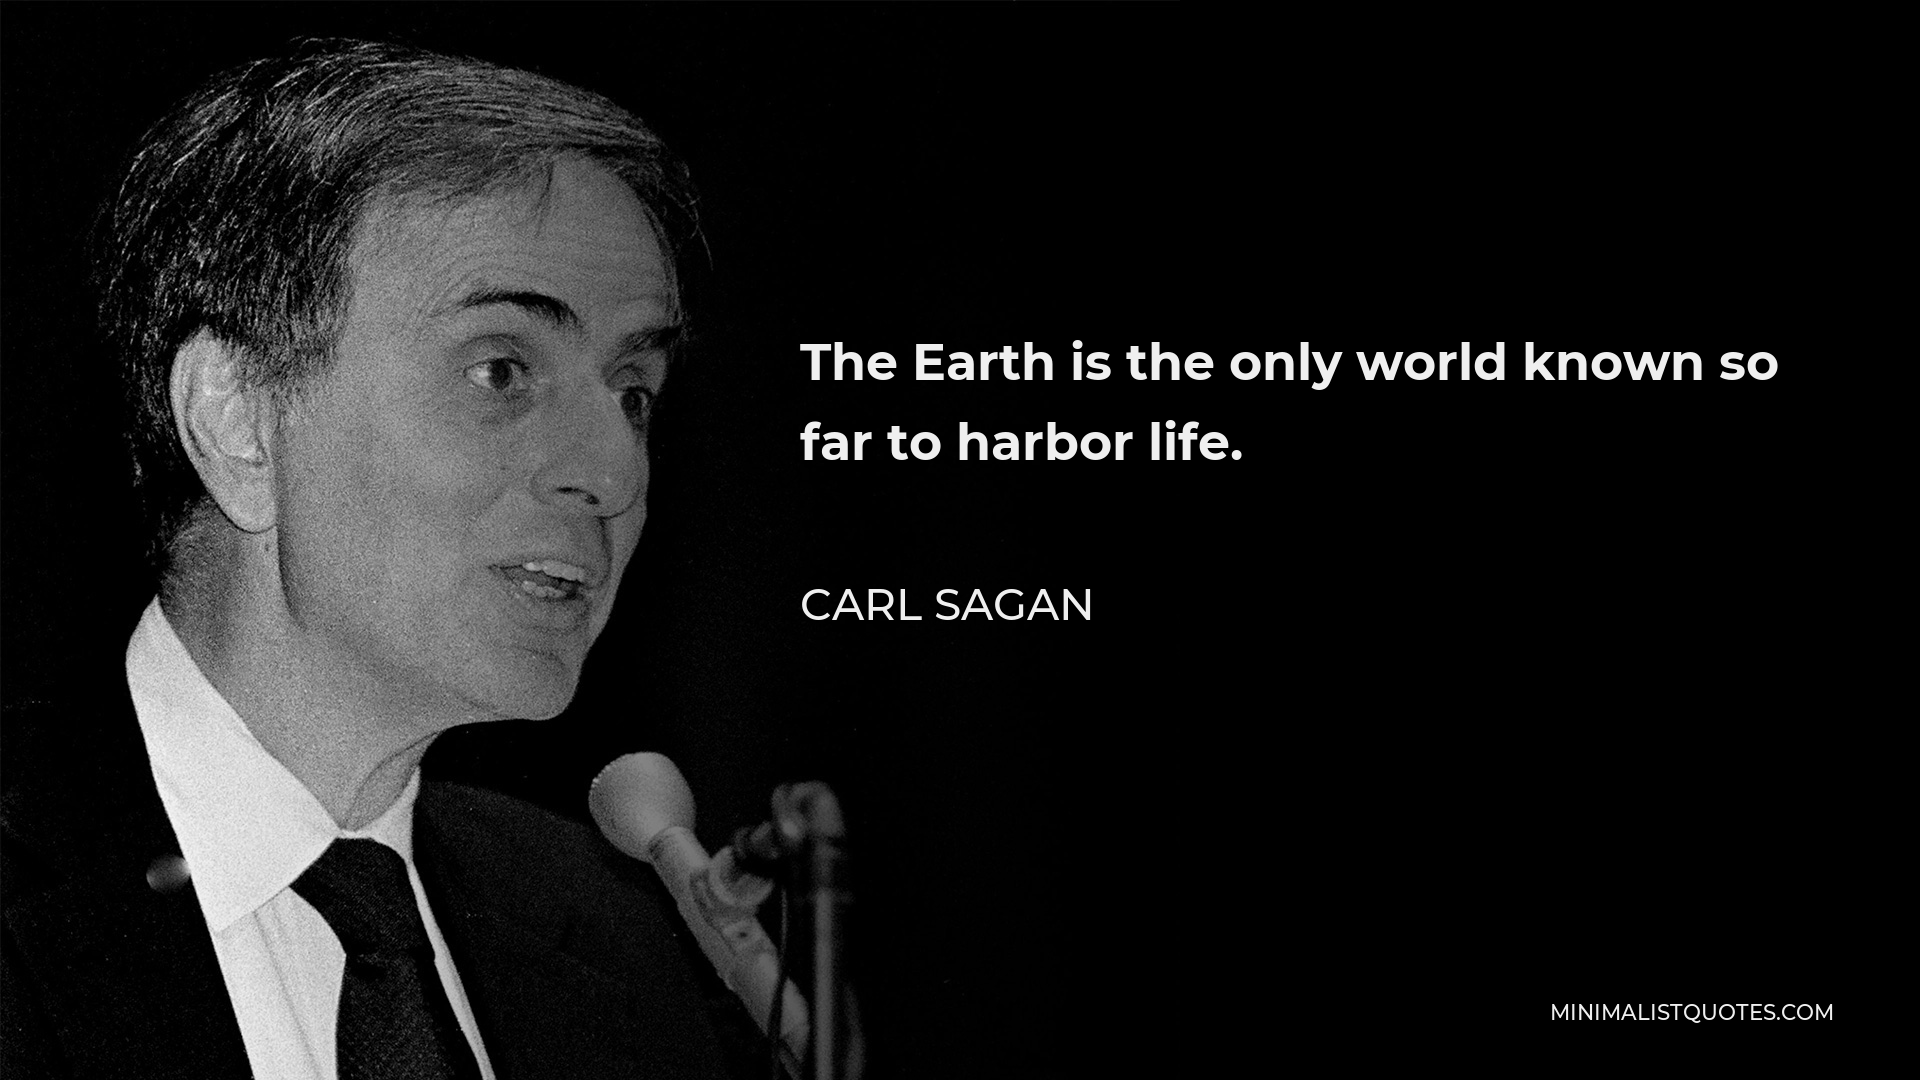 Carl Sagan Quote - The Earth is the only world known so far to harbor life.